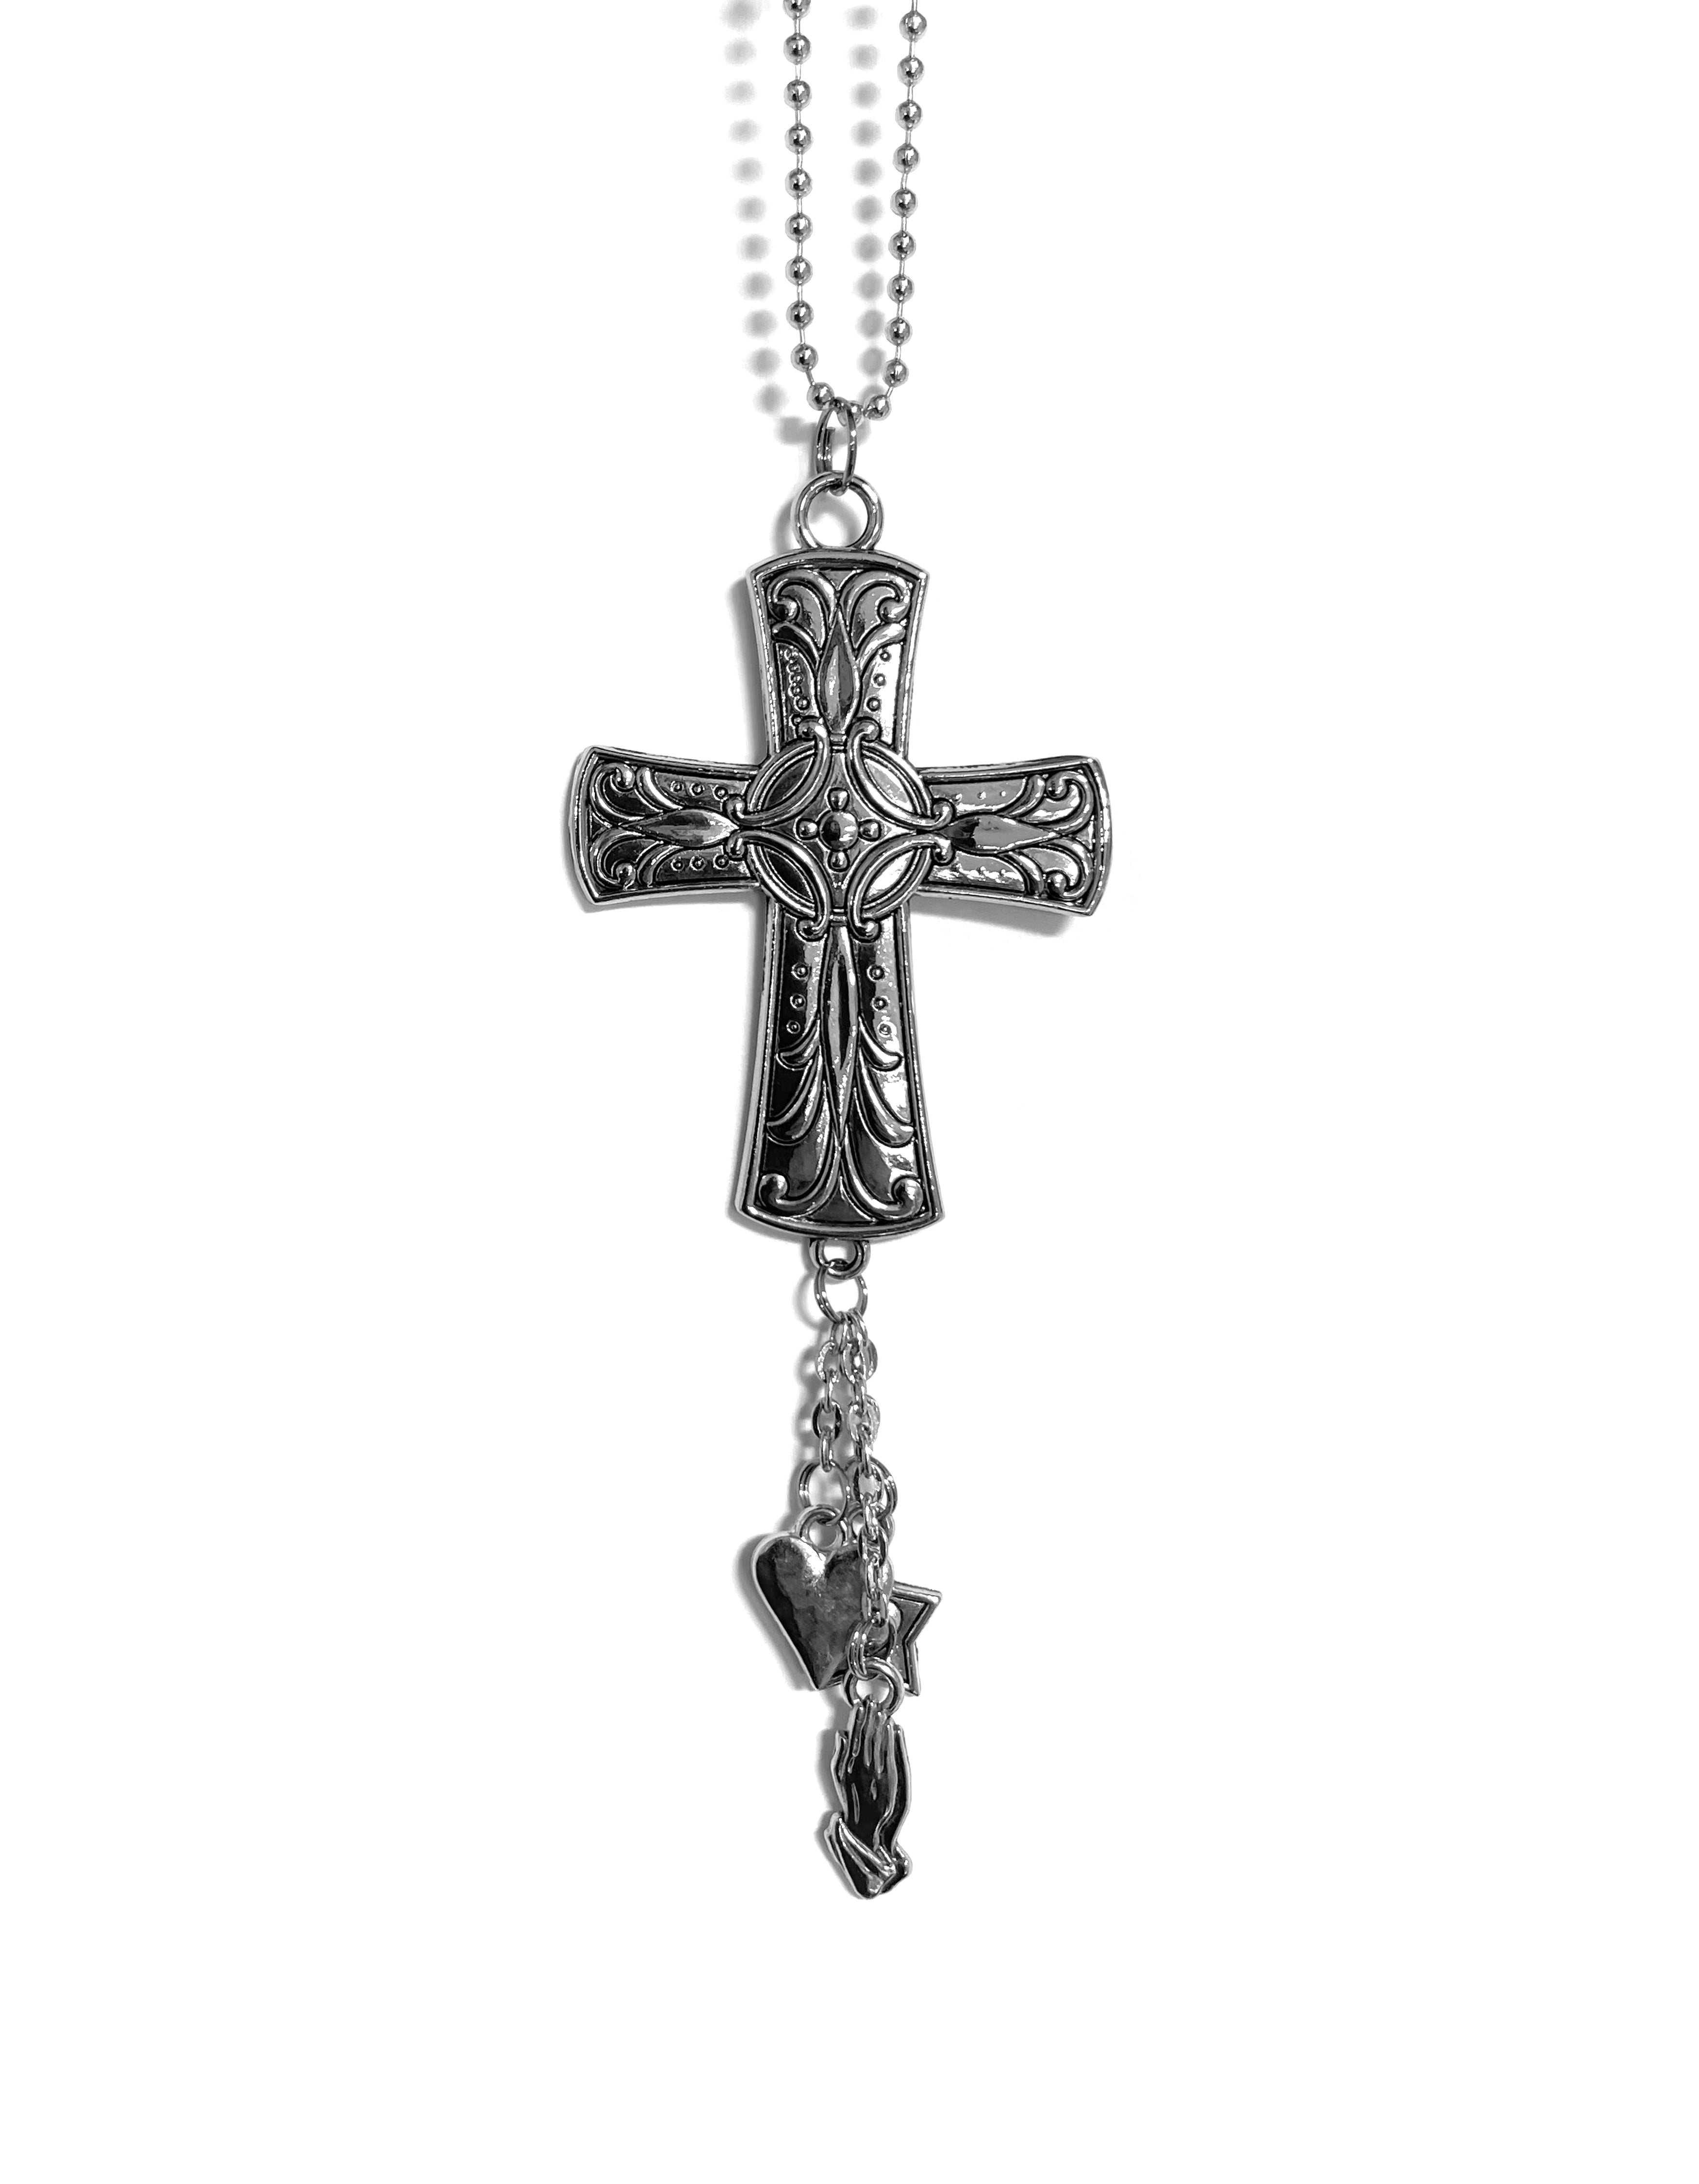 Hanging metallic cross special accessory to accompany you in your car